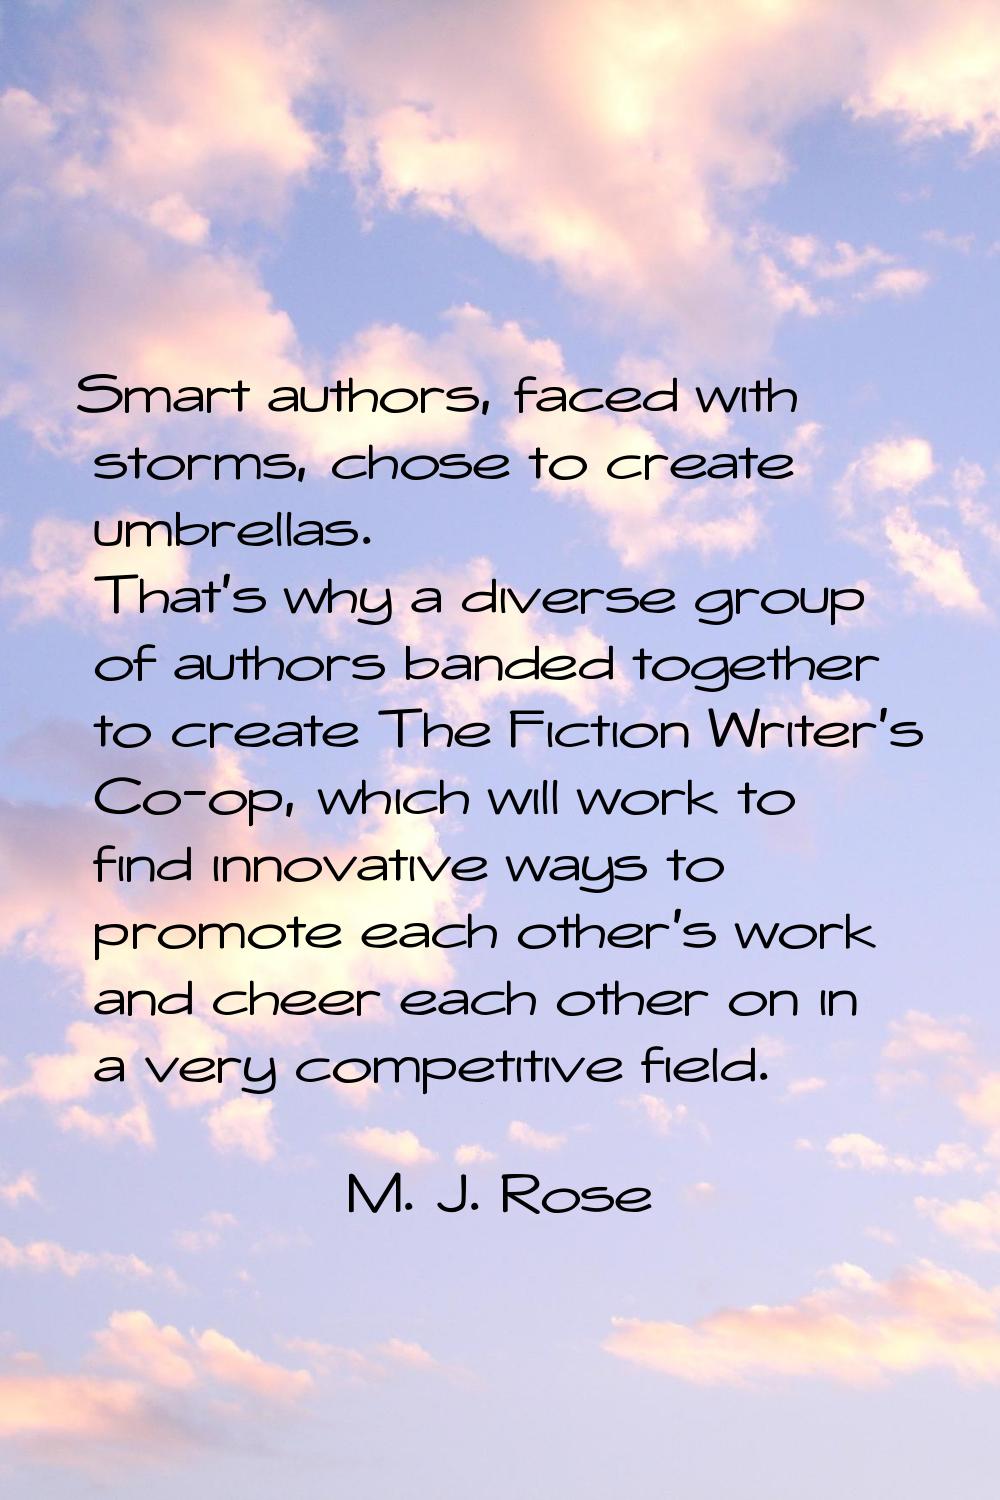 Smart authors, faced with storms, chose to create umbrellas. That's why a diverse group of authors 